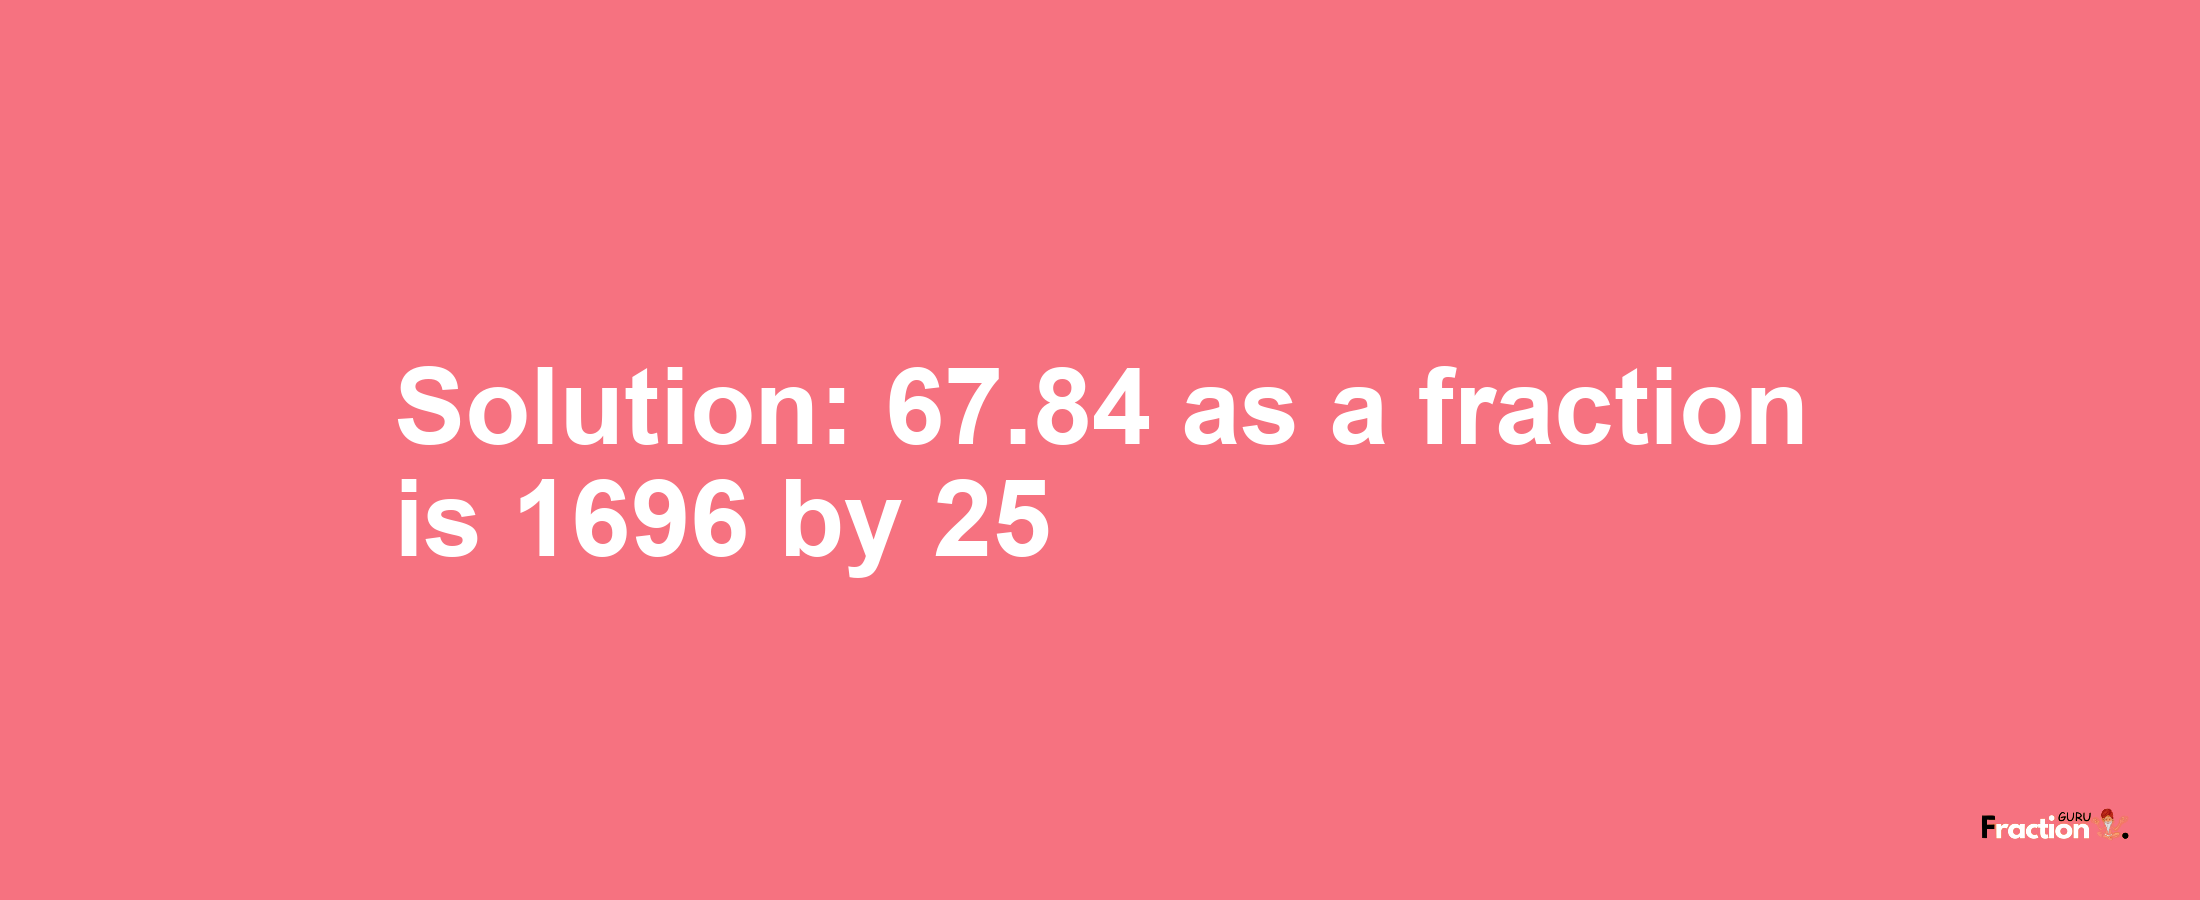 Solution:67.84 as a fraction is 1696/25